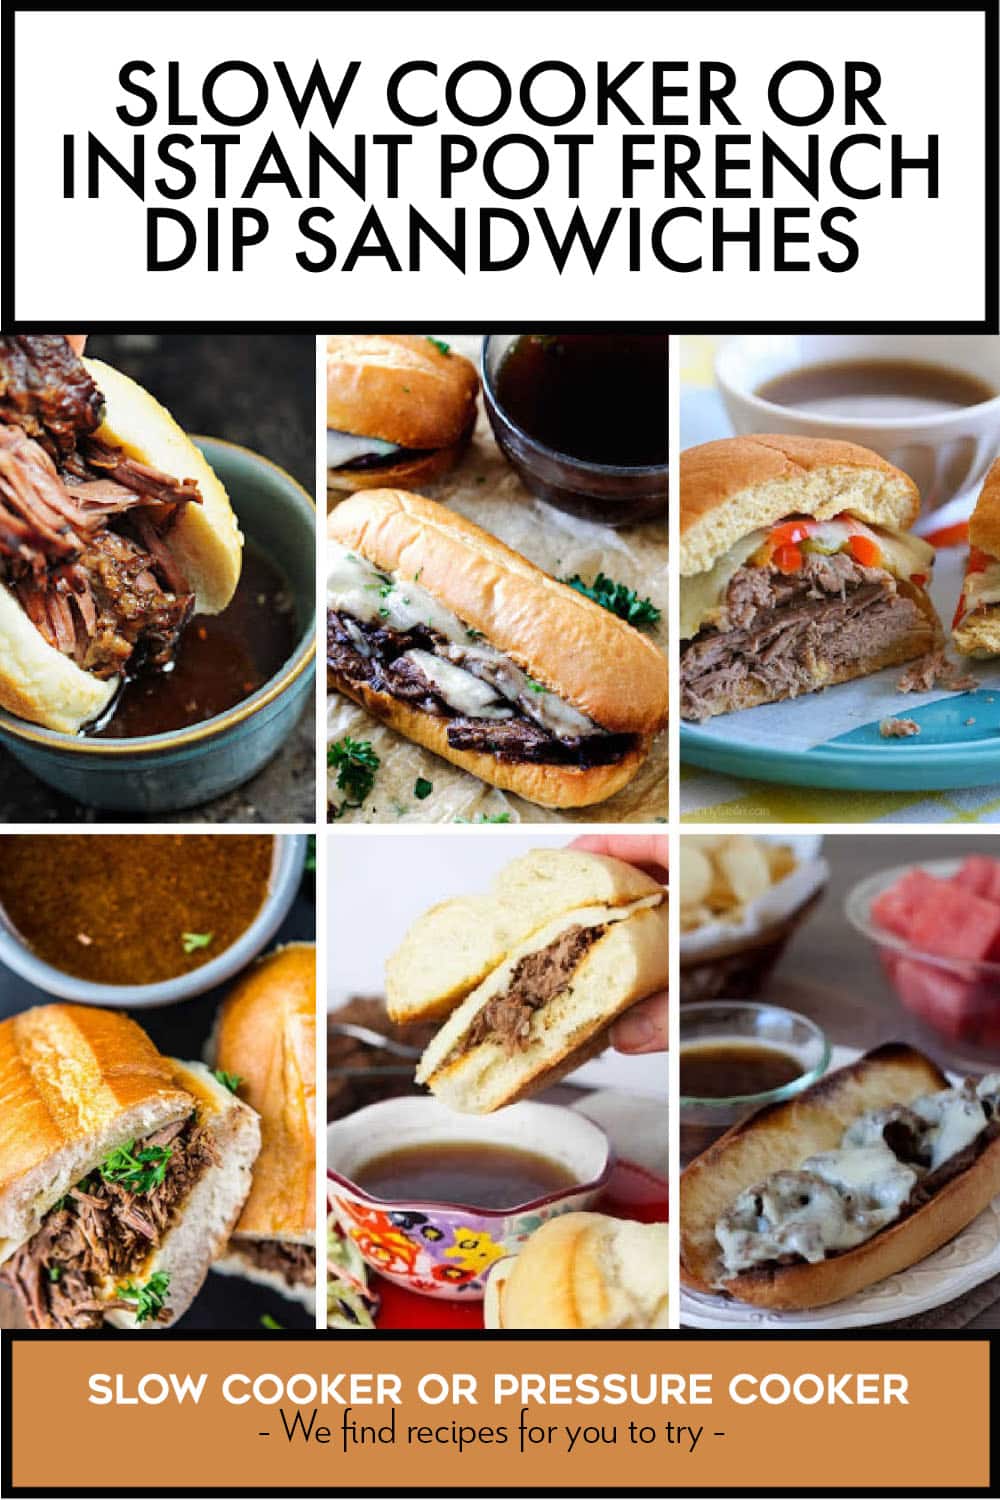 Pinterest image of Slow Cooker or Instant Pot French Dip Sandwiches